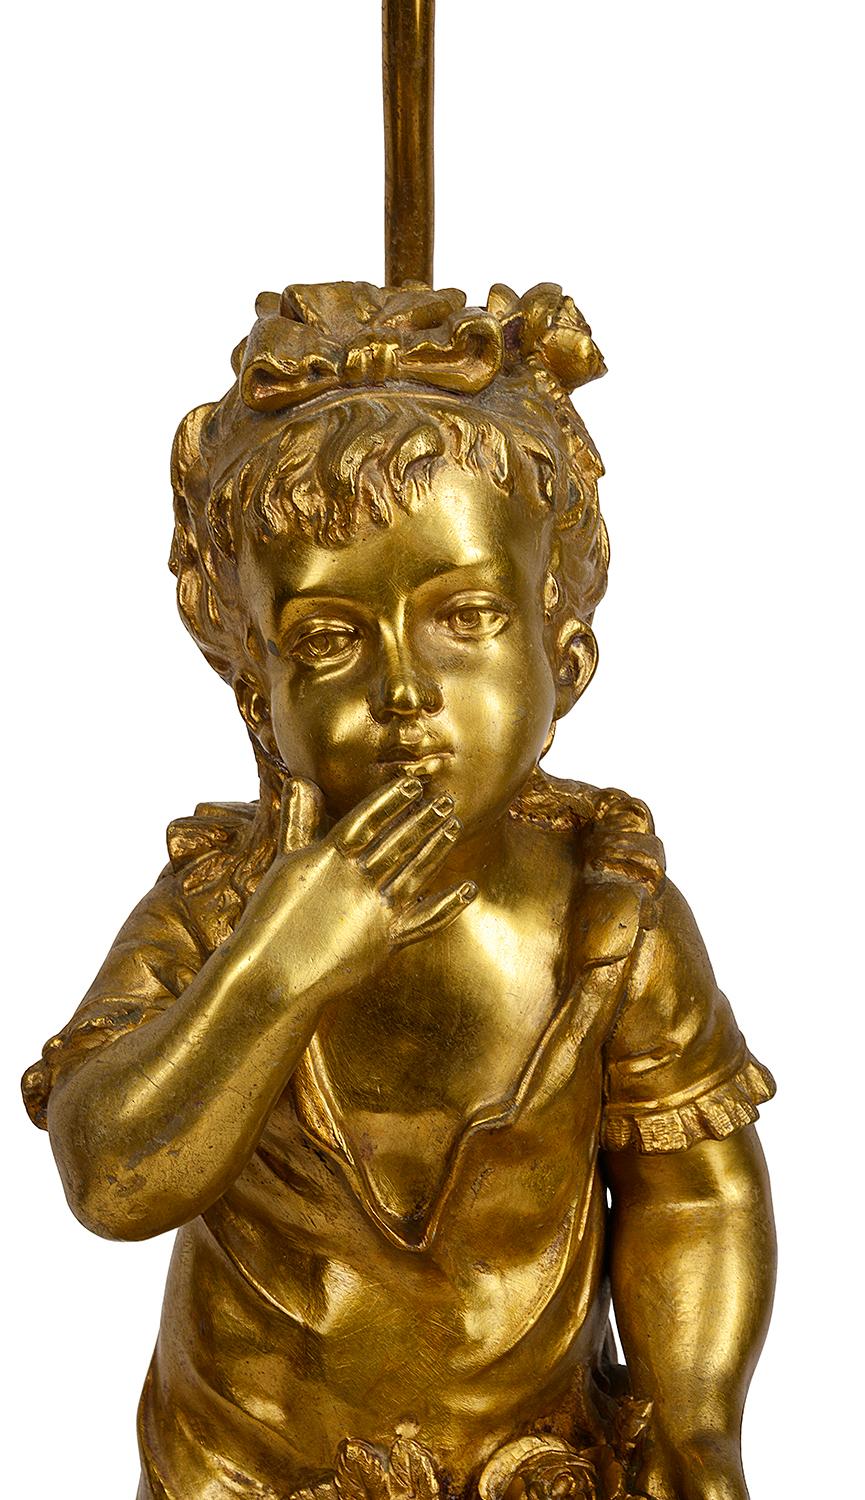 A very good quality late 19th century gilded bronze statue of a young girl blowing a kiss and holding flowers she's picked in her dress. Mounted on a grey marble base with a lamp fitting behind.
Signed, A. Vilair.